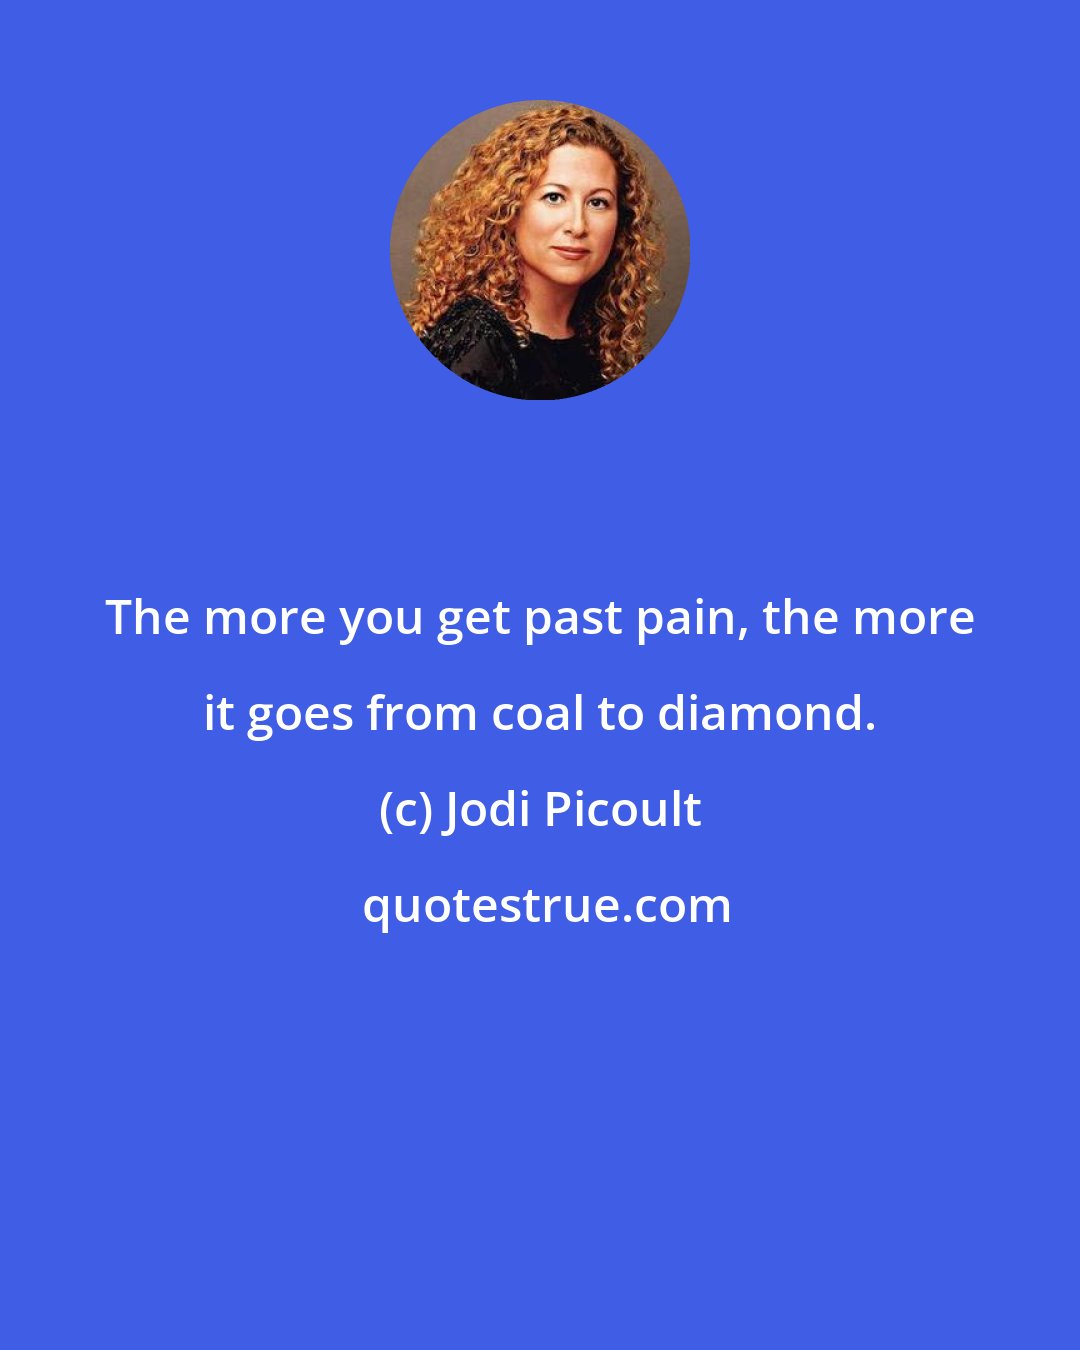 Jodi Picoult: The more you get past pain, the more it goes from coal to diamond.